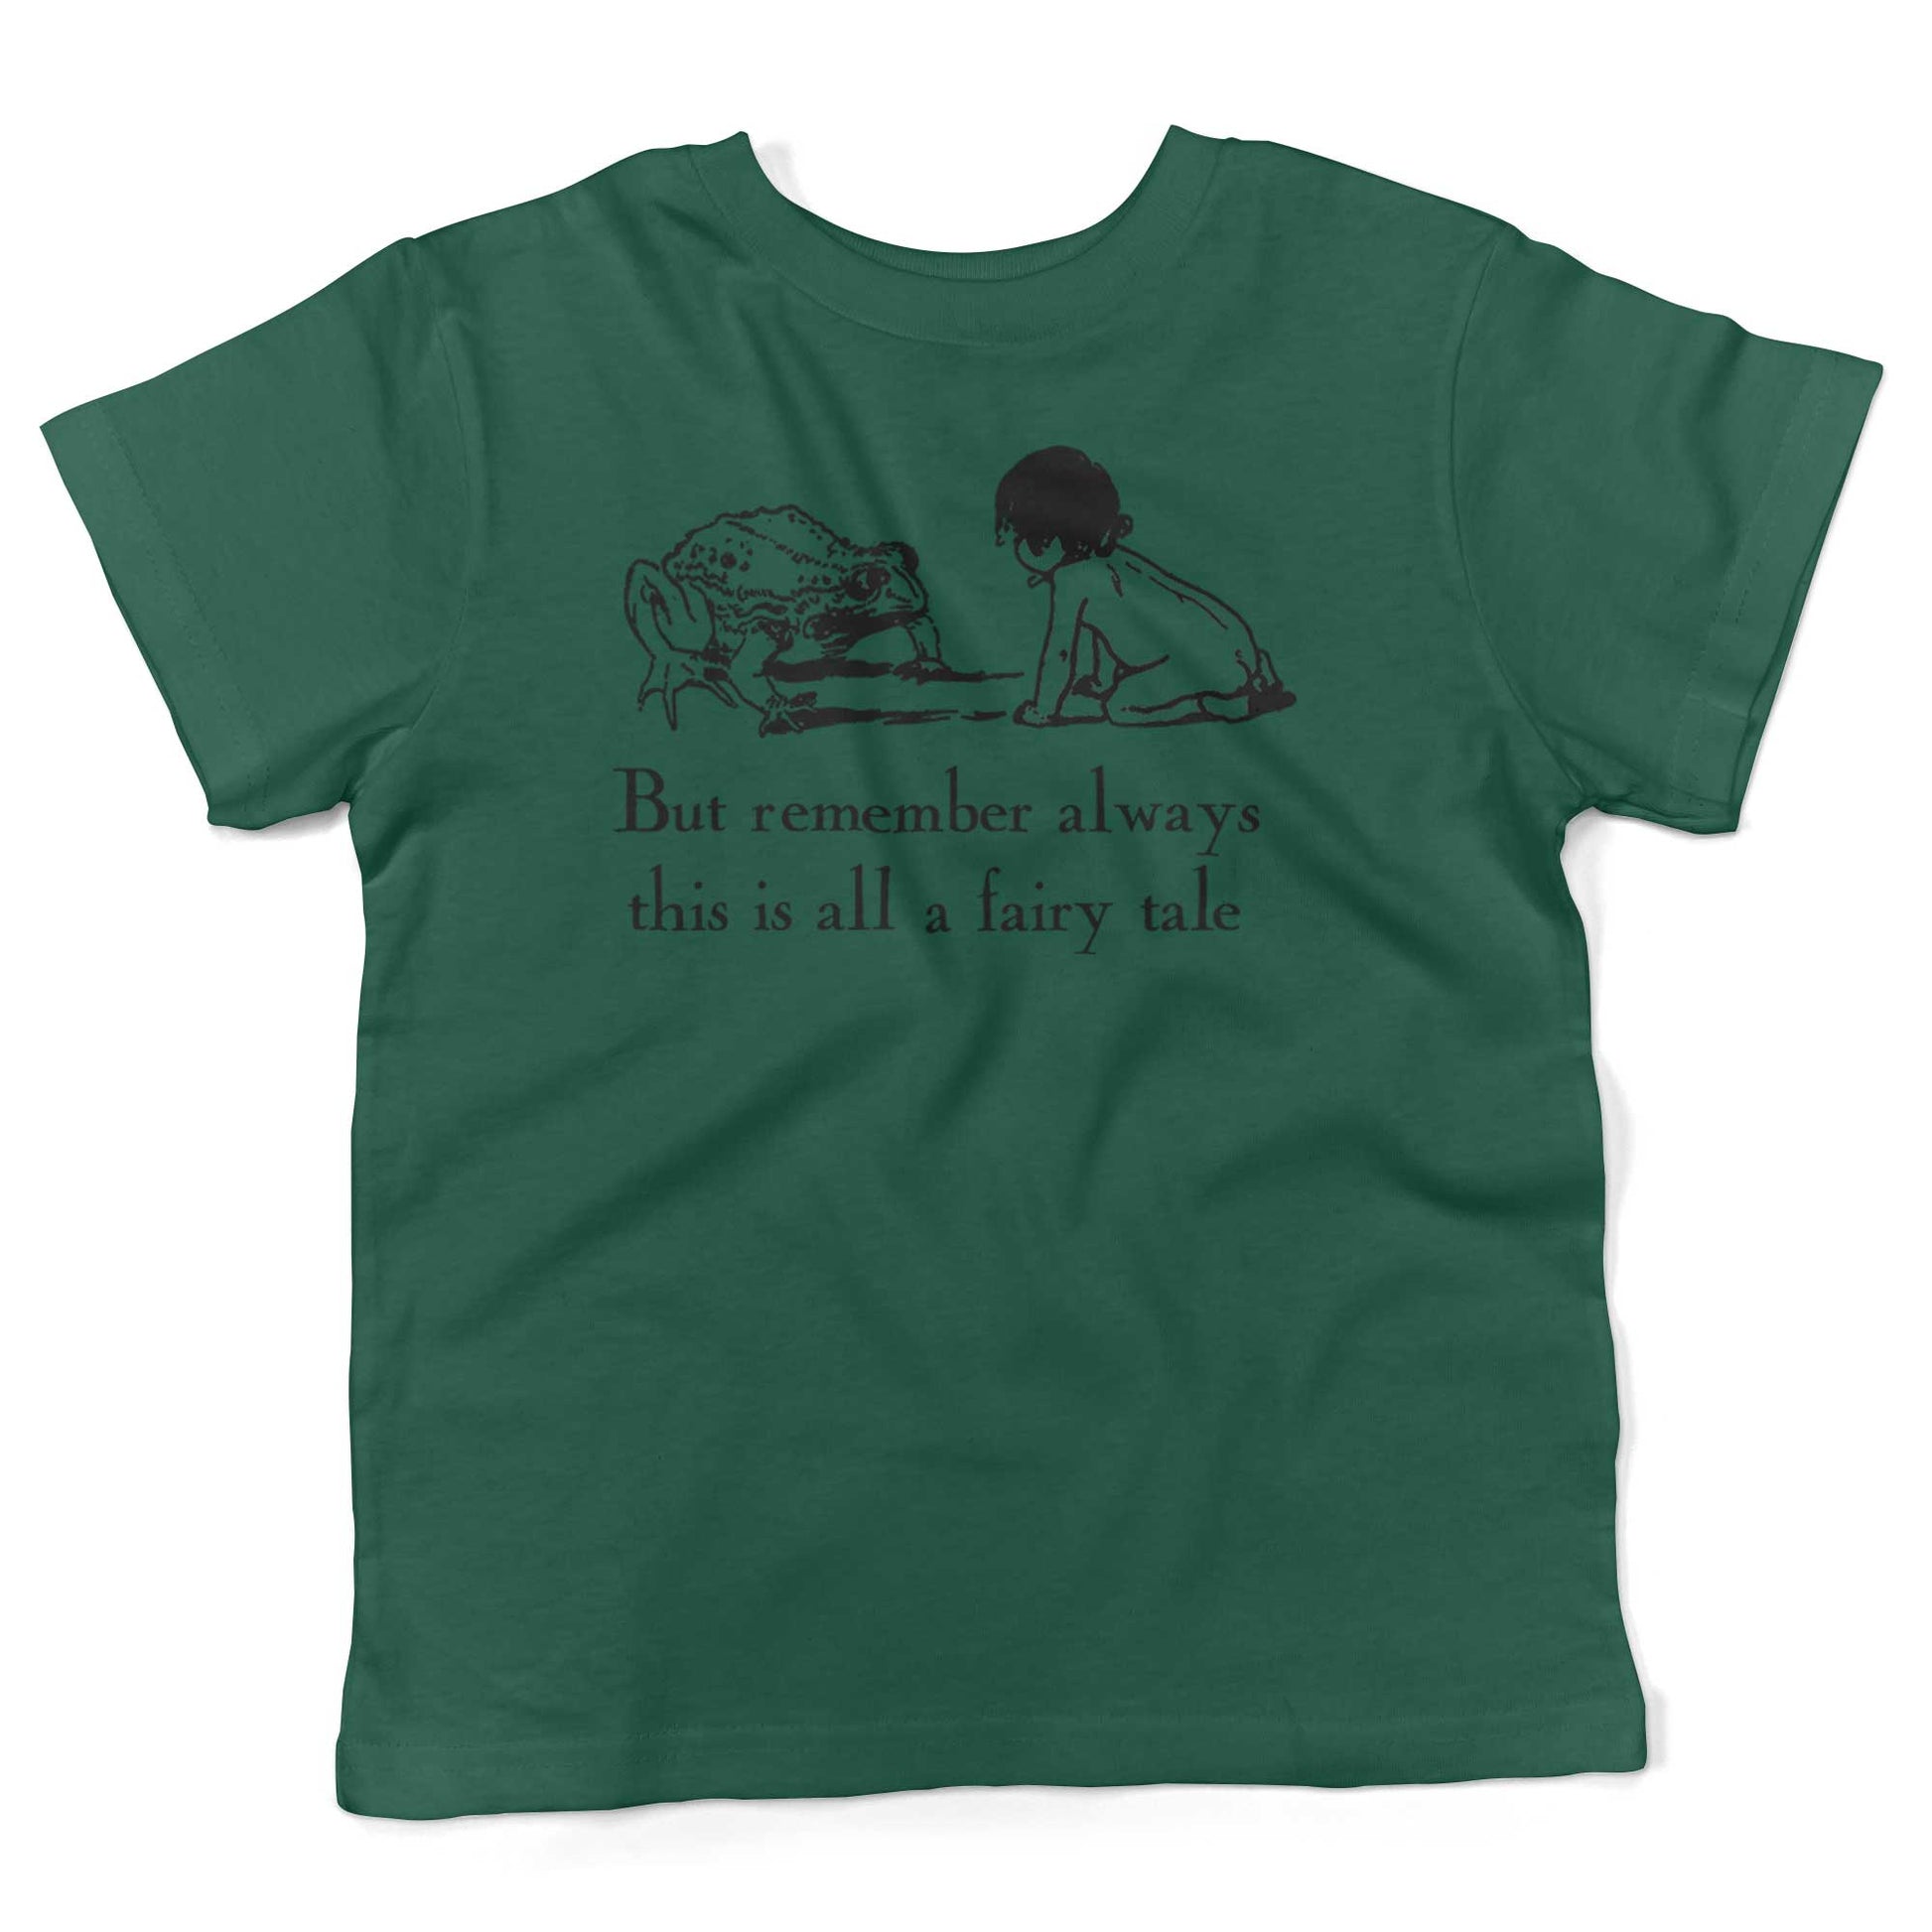 But remember always this is all a fairy tale Toddler Shirt-Kelly Green-2T